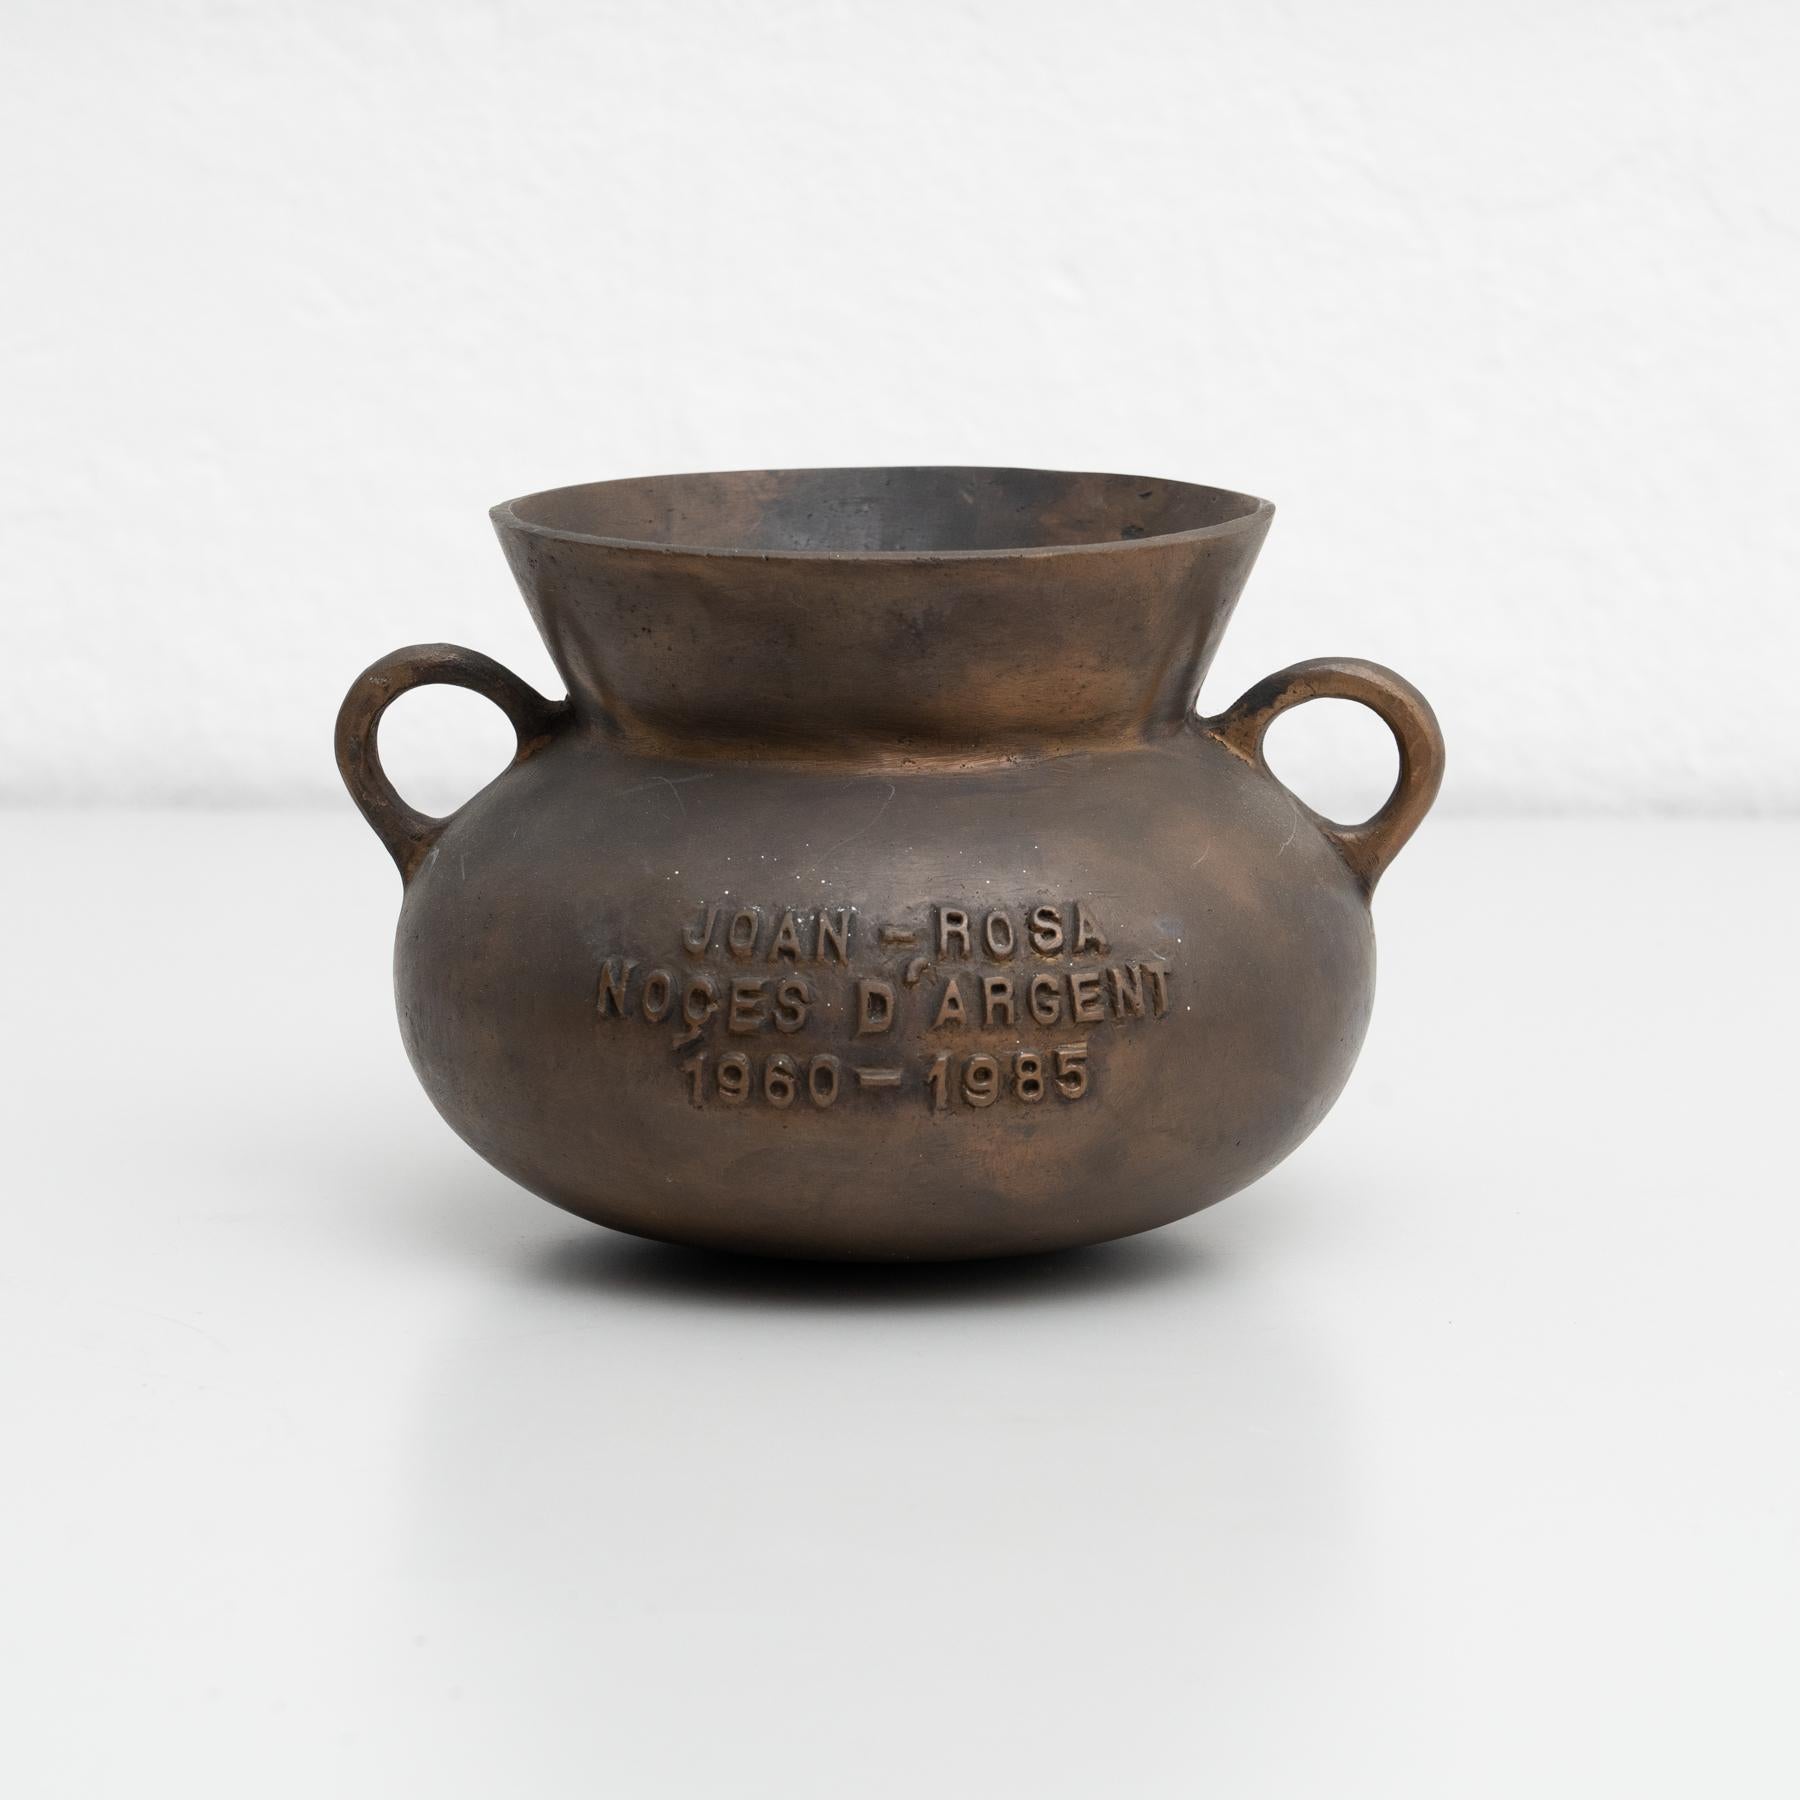 Vintage bronze pot. 

Made in a catalan foundry in Olot, Spain circa 1985

In original condition, with minor wear consistent with age and use, preserving a beautiful patina.

Materials:
Bronze.
 